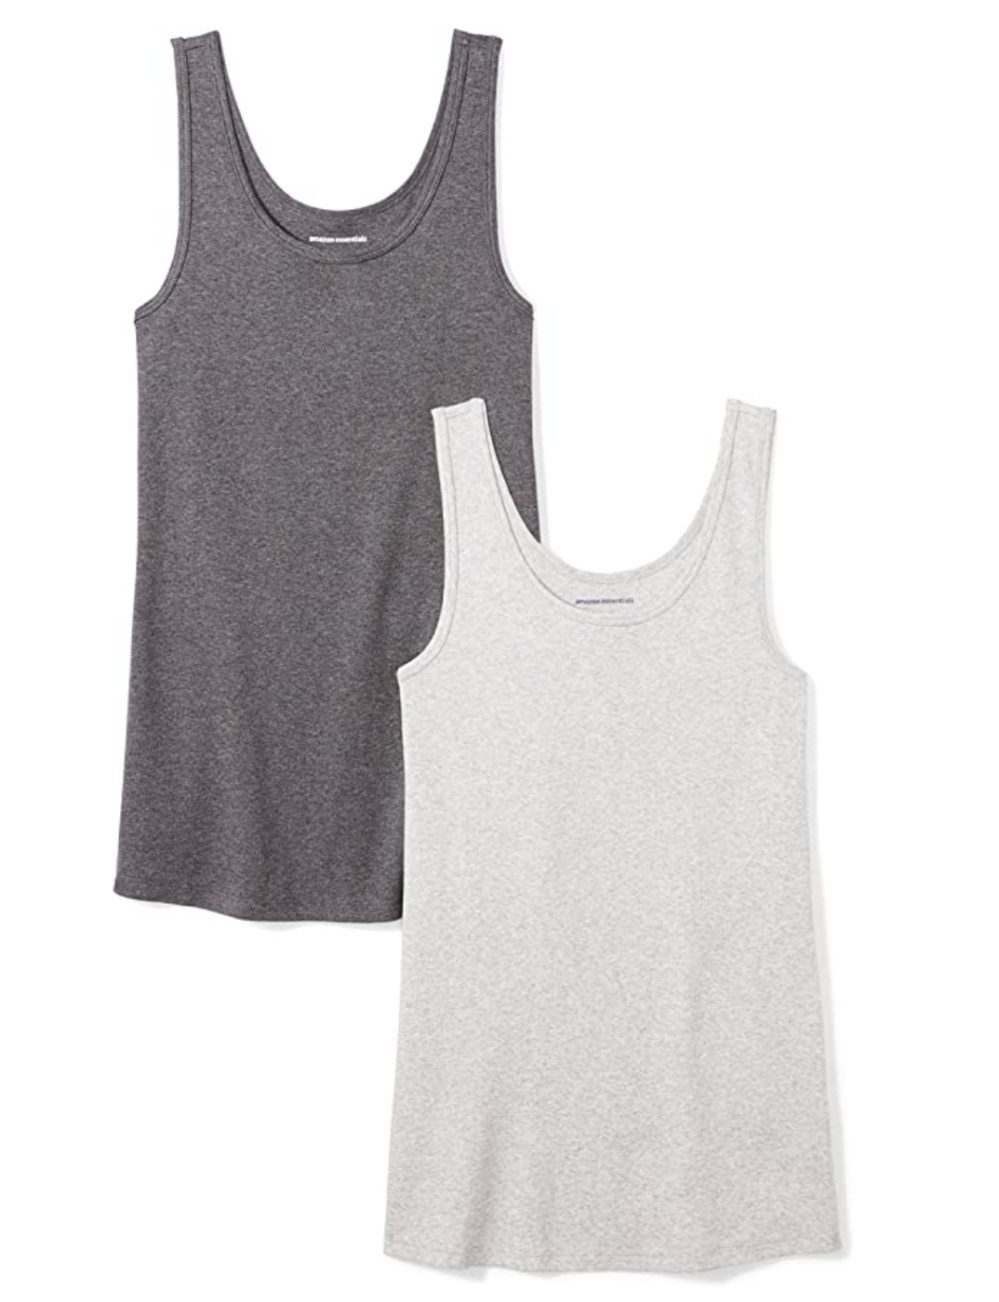 Amazon Essentials Slim-Fit Tanks Are the Best Work-From-Home Tops